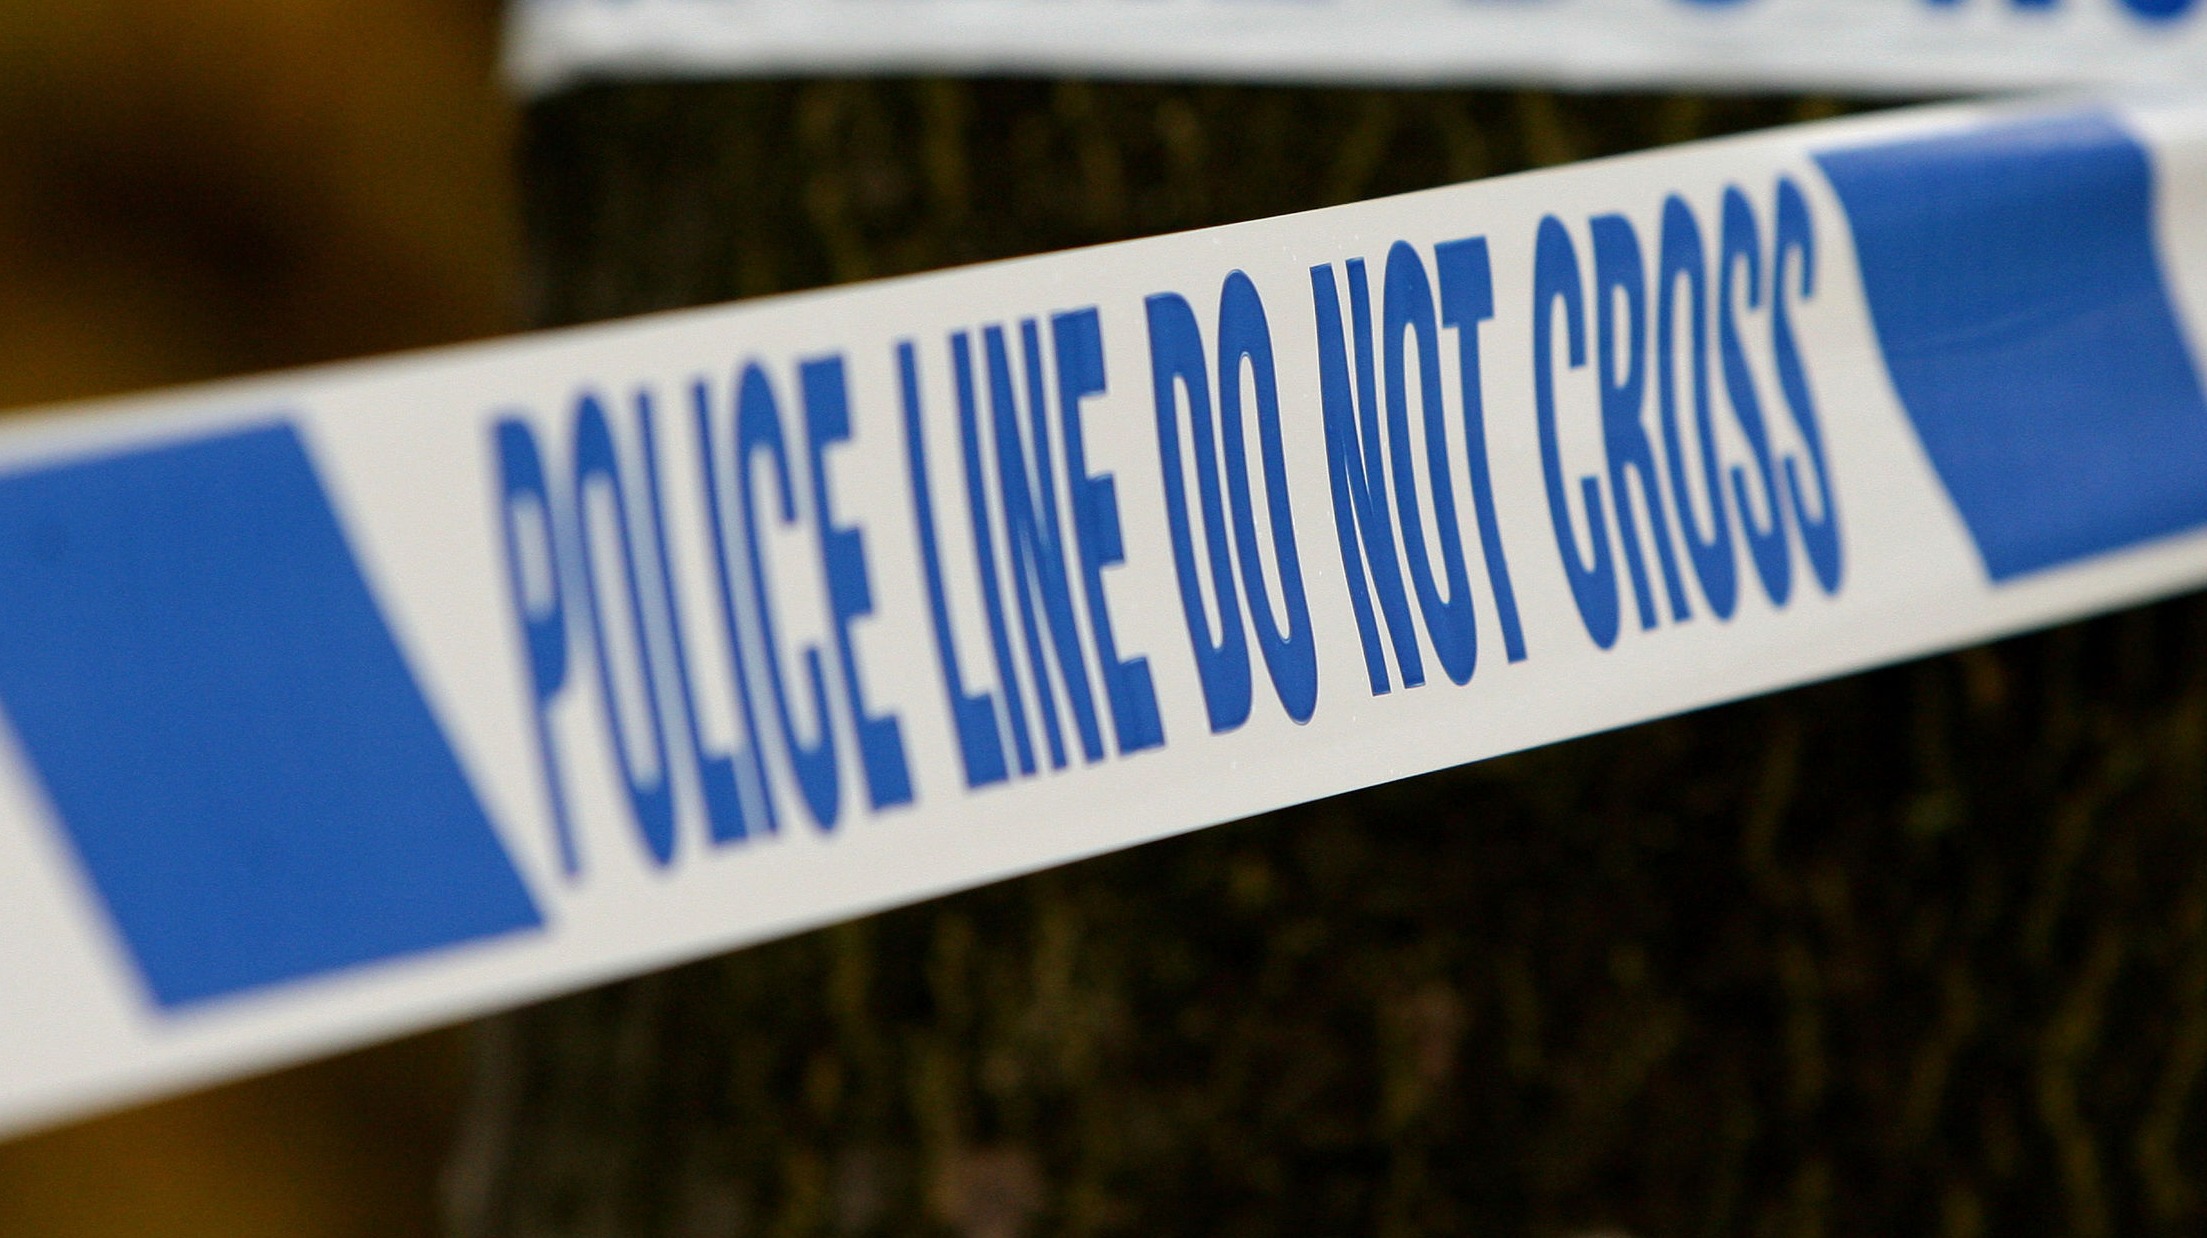 Three arrested after 15-year-old boy stabbed at school | ITV News London